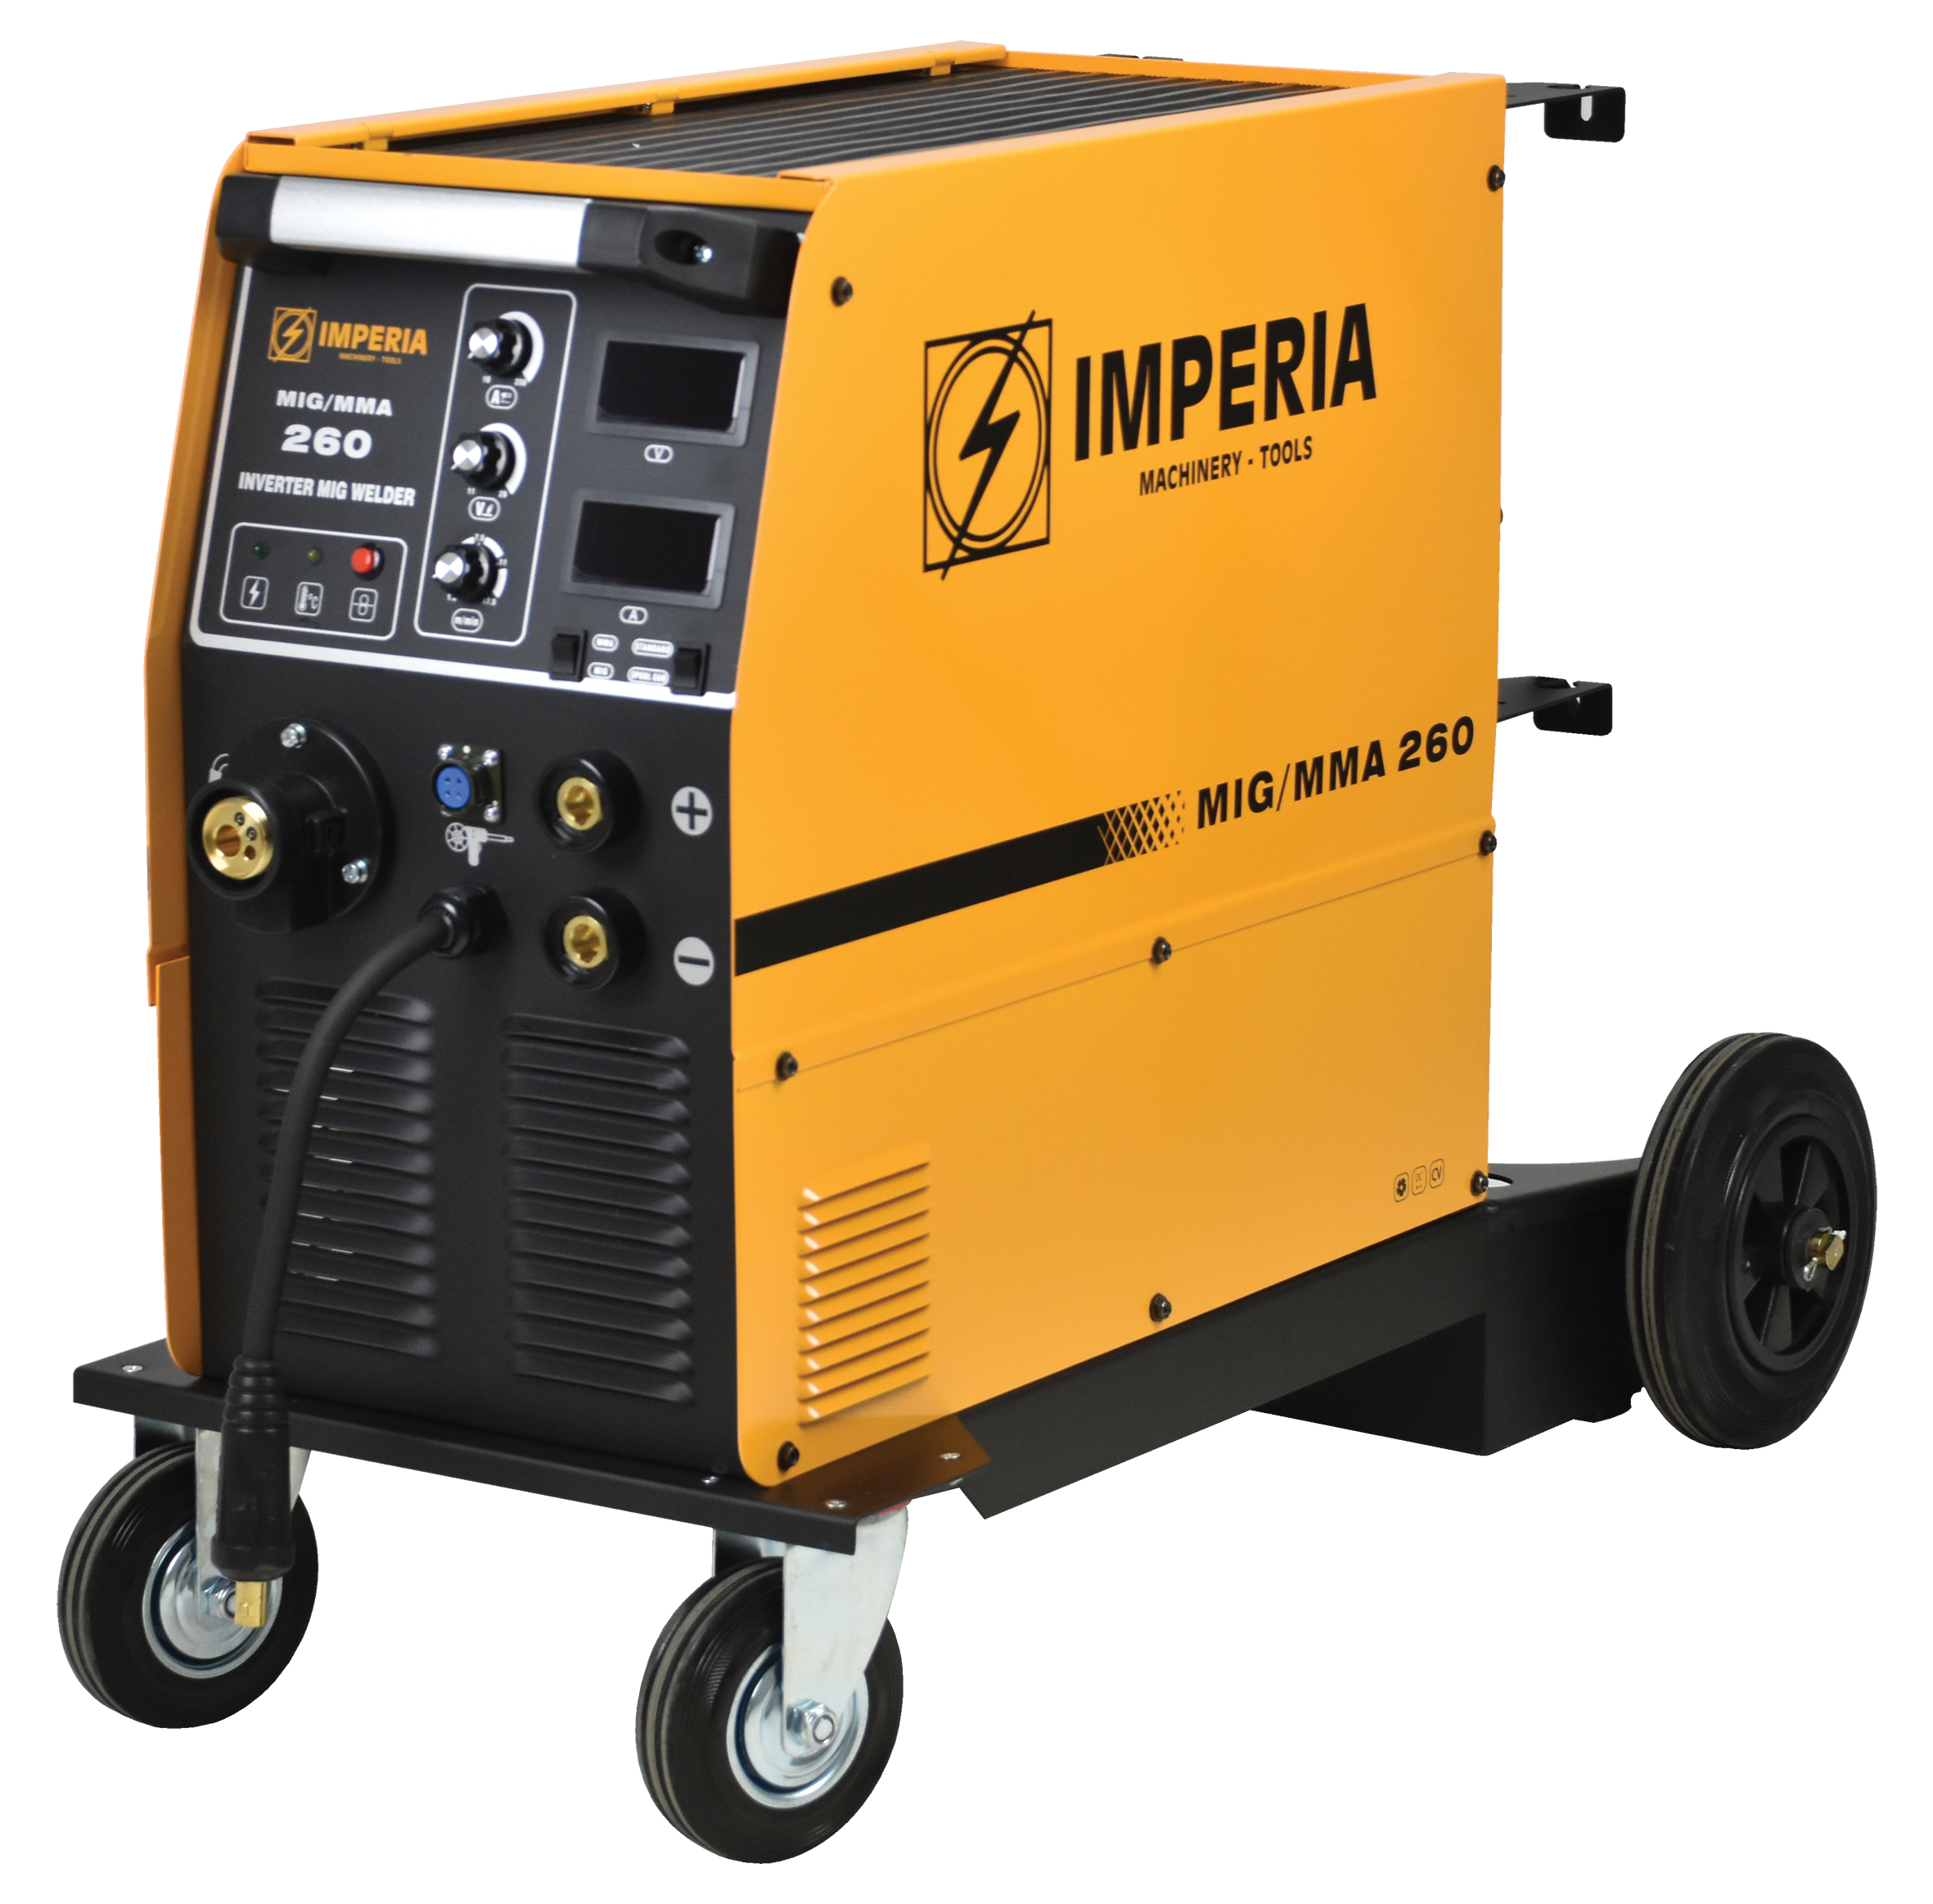 Inverter Welder for Wire and Electrode (MIG/MMA) MIG 260 Imperia